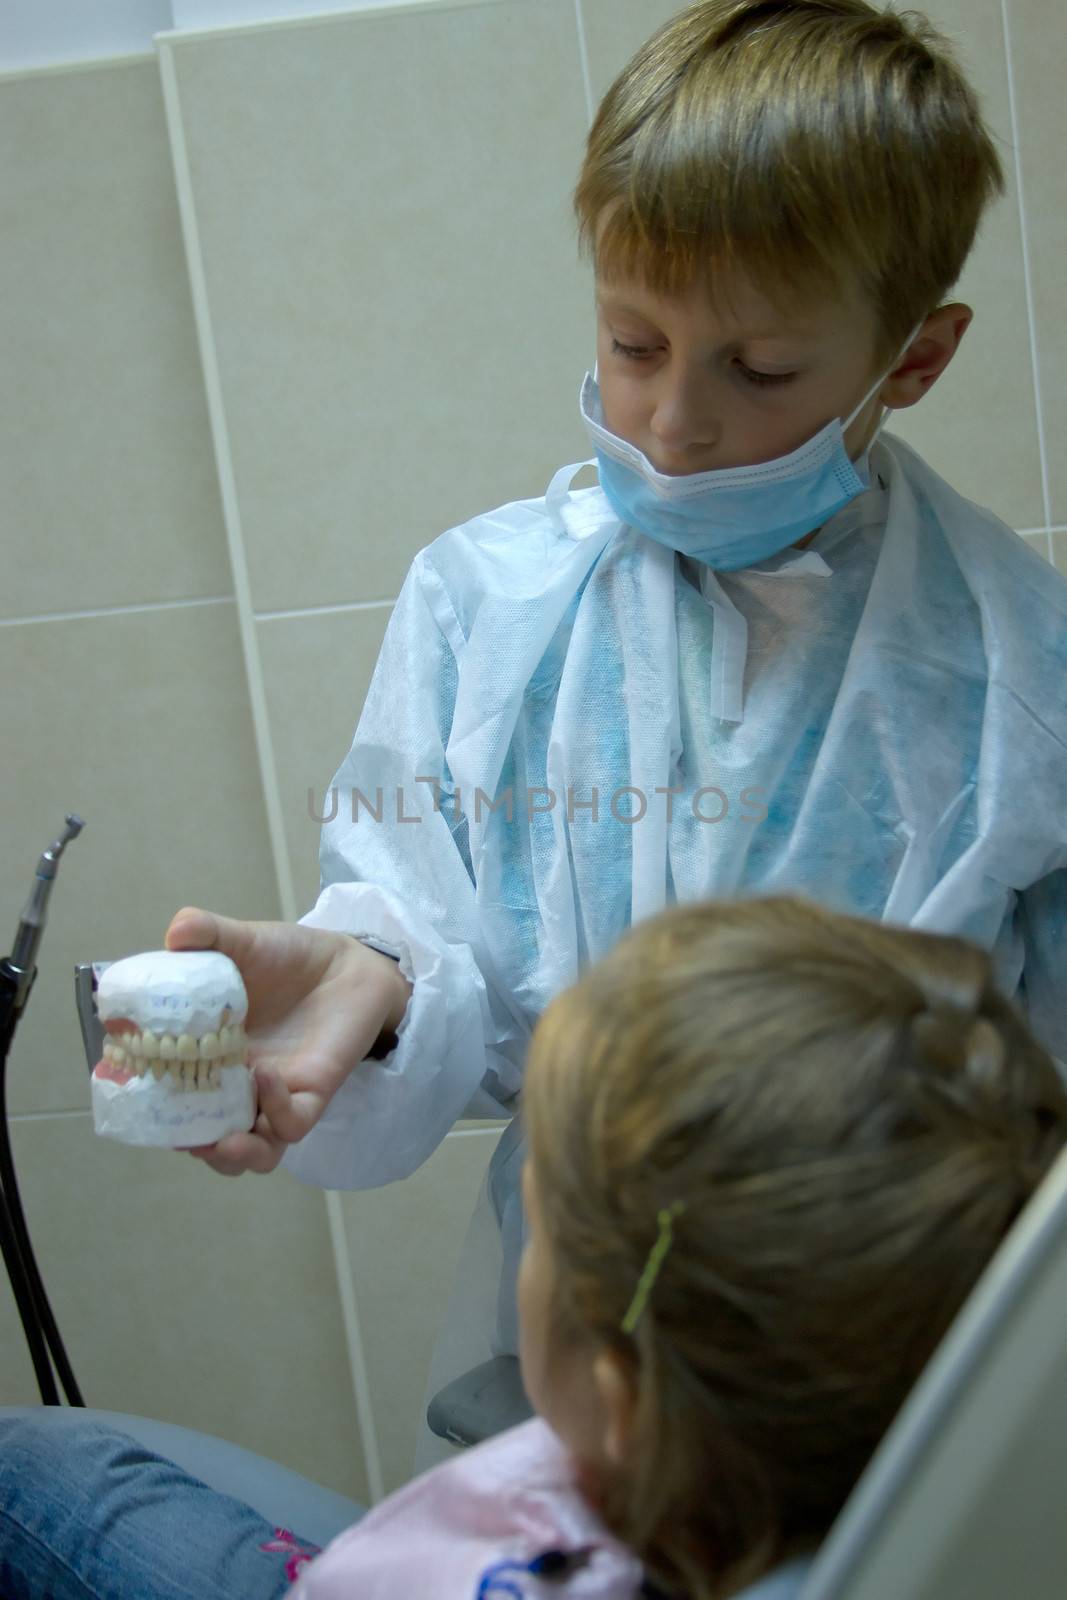 8 years old boy wants to be an orthodontist. Choosing a profession